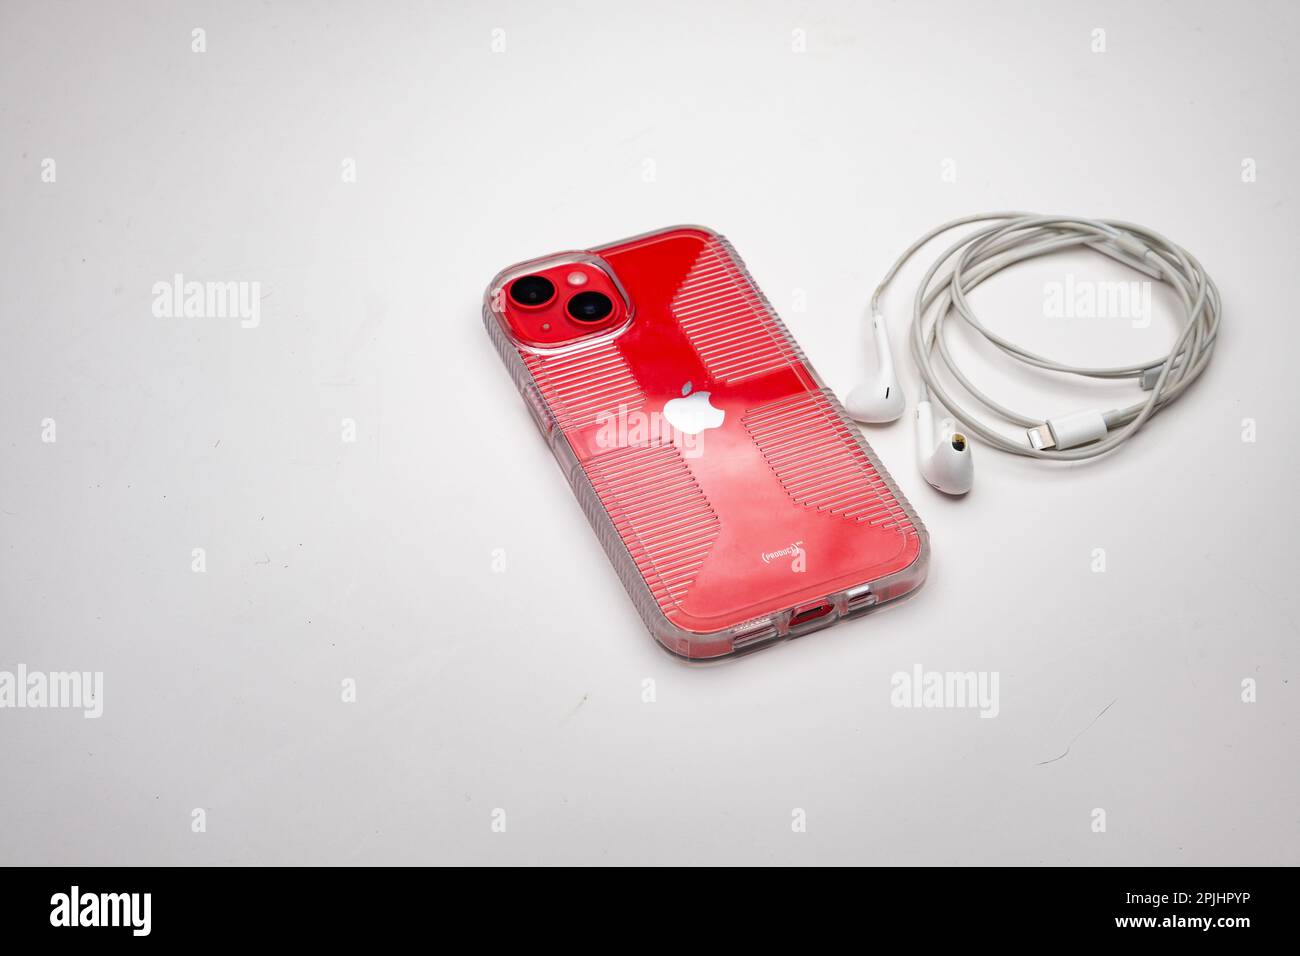 Apple iPhone 14 cellphone in (Product) Red color with earbuds and clear protective case on white background Stock Photo